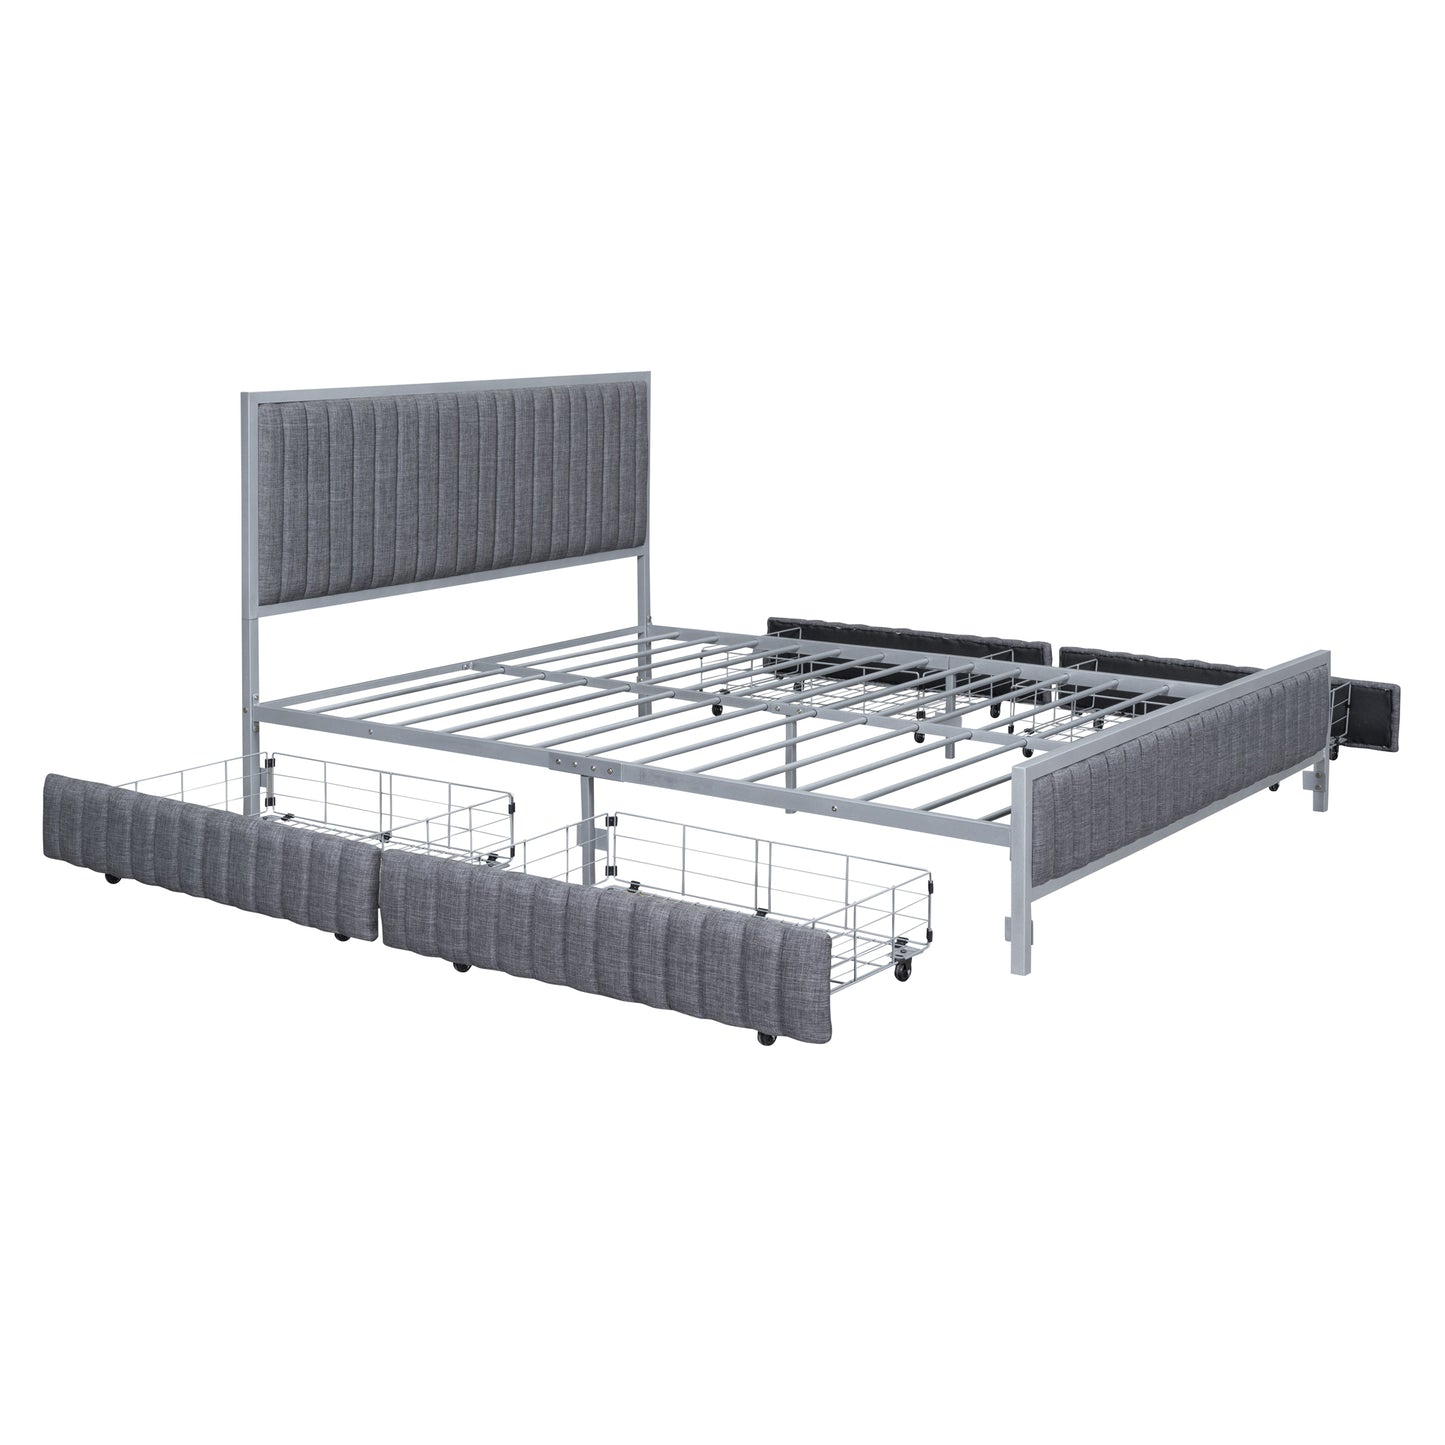 Queen Size Upholstered Platform Bed with 4 Drawers, Linen Fabric, Gray